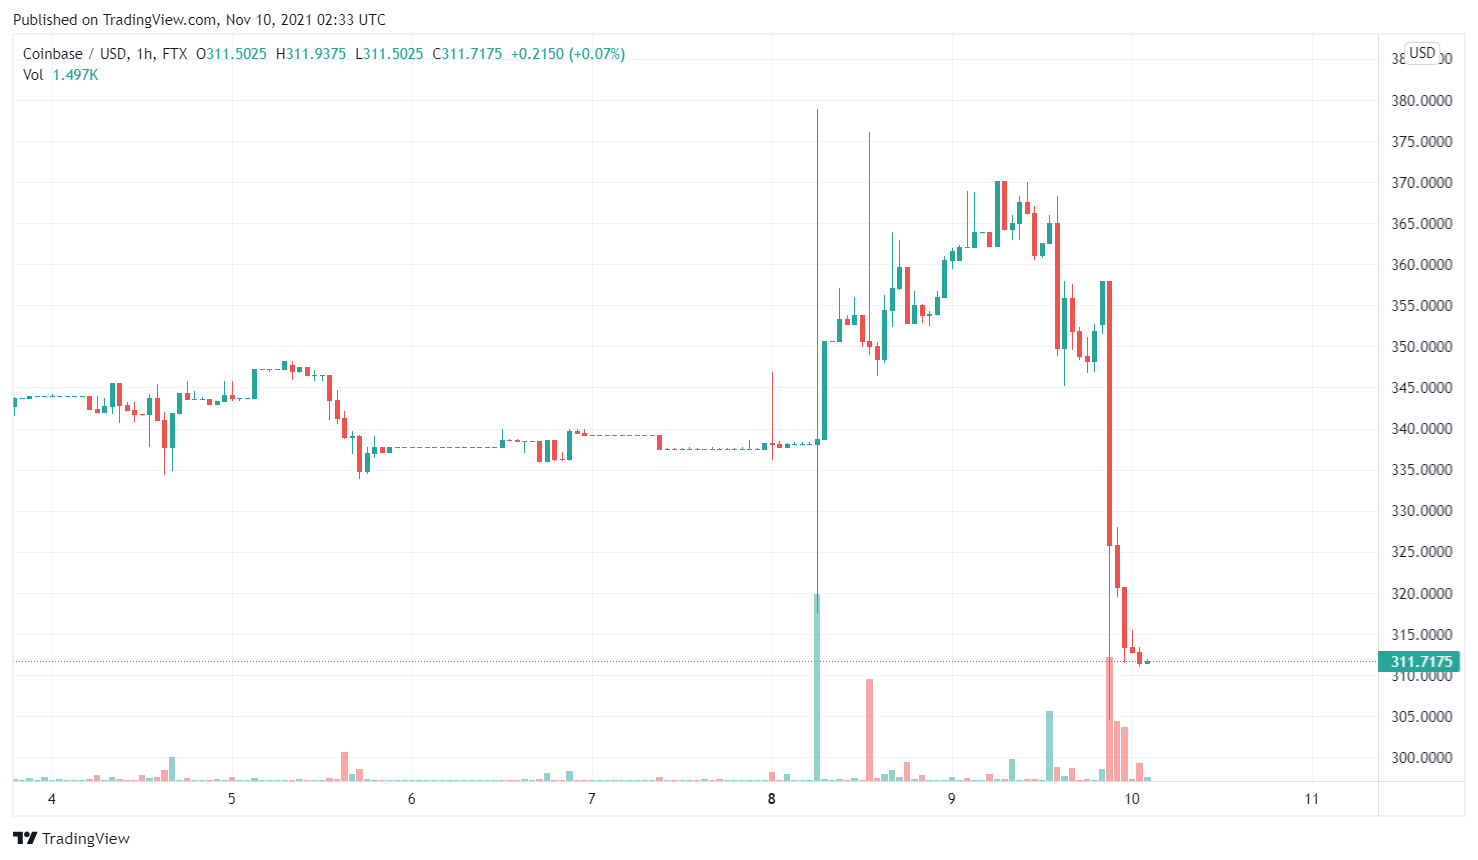 COIN / USD stock price chart.  Source: TradingView